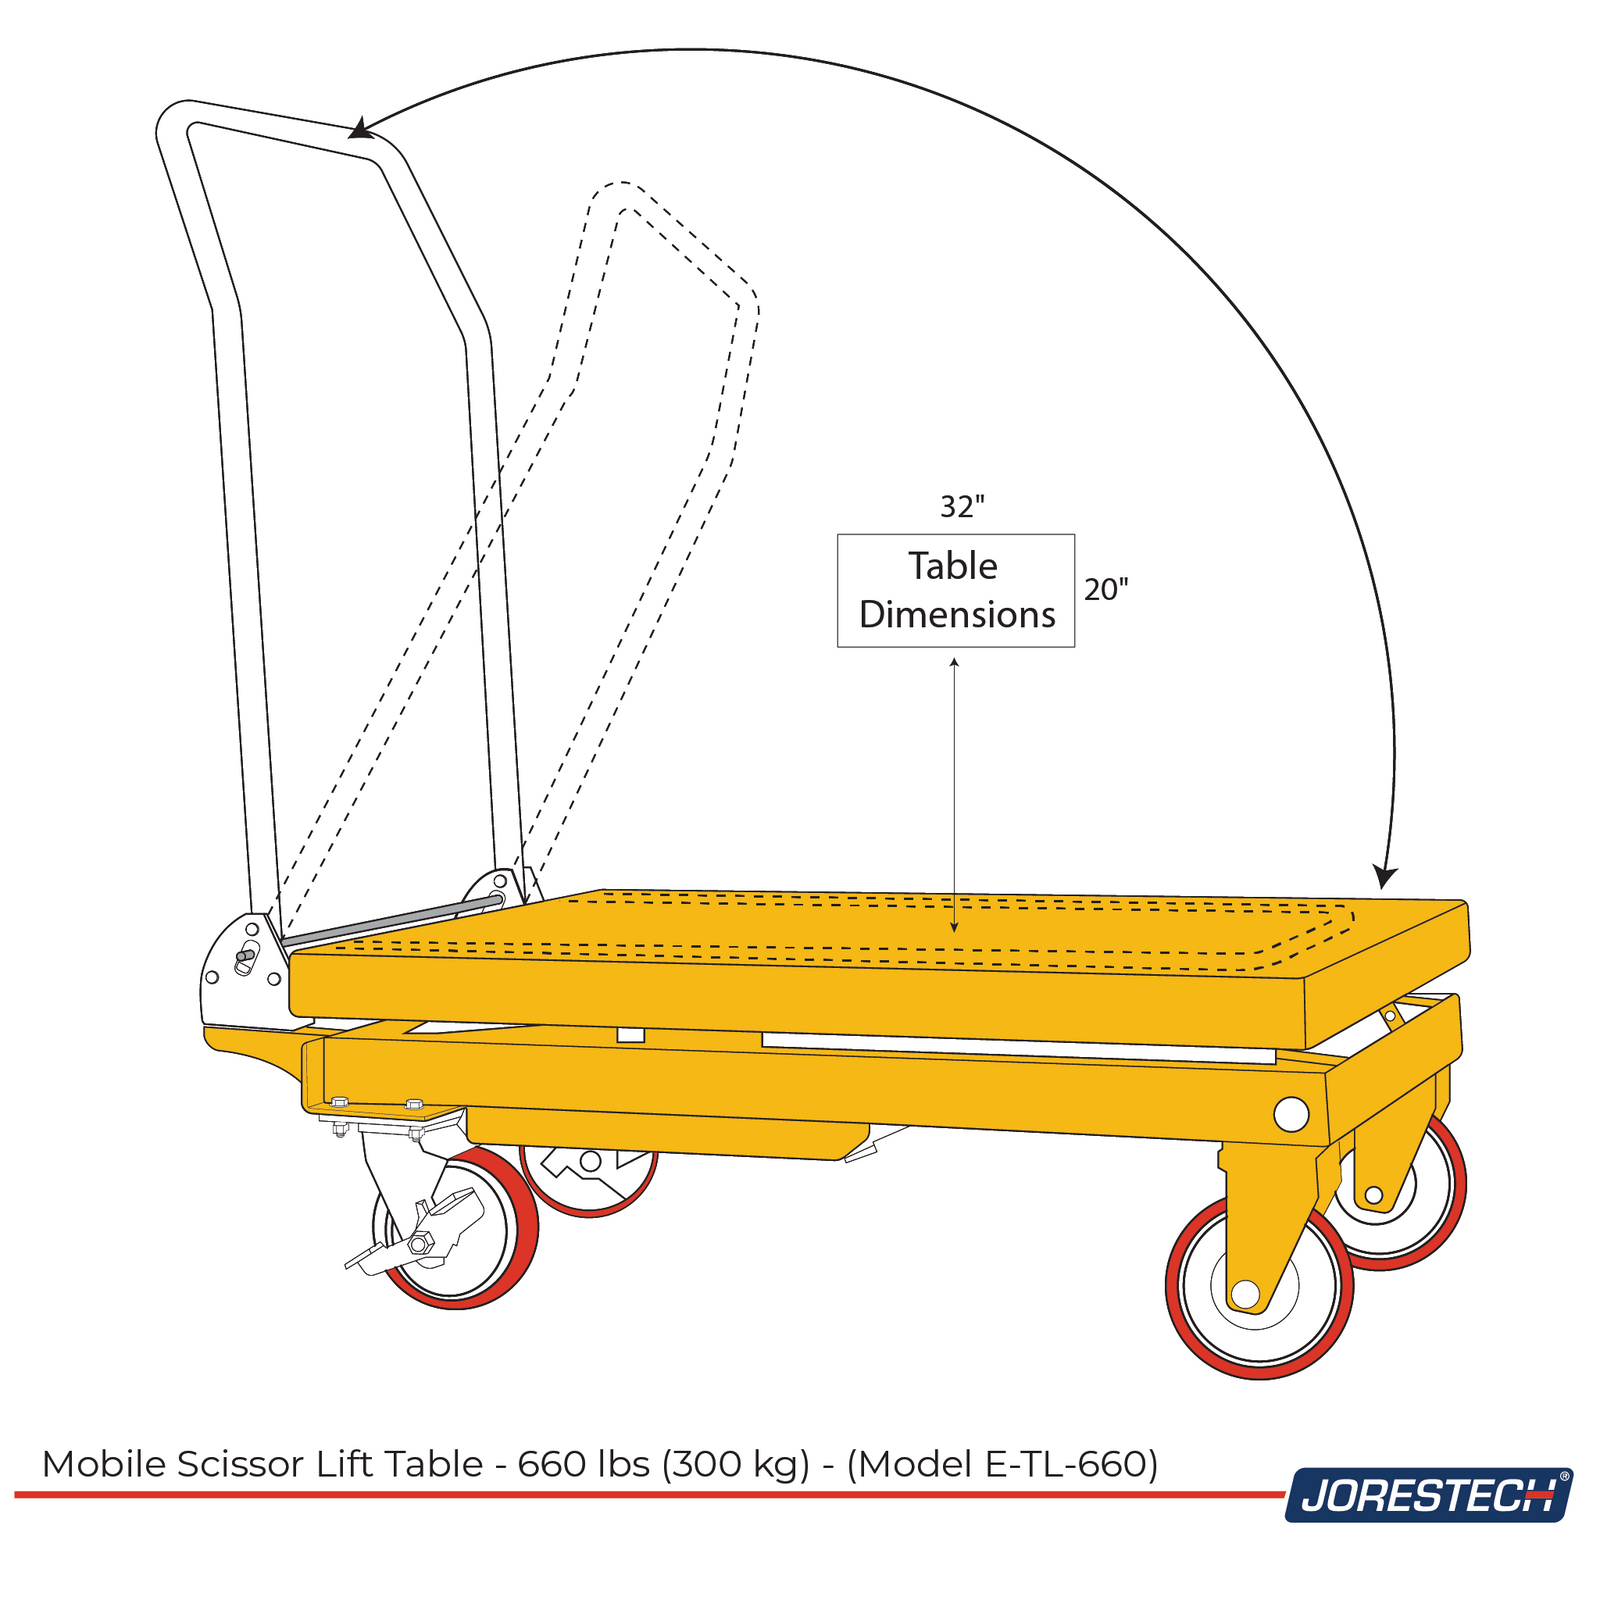 Diagram in yellow, black and red that shows that the handle of the JORESTECH lift table is collapsible and  text also reads table dimensions  32 inches by 20 inches.